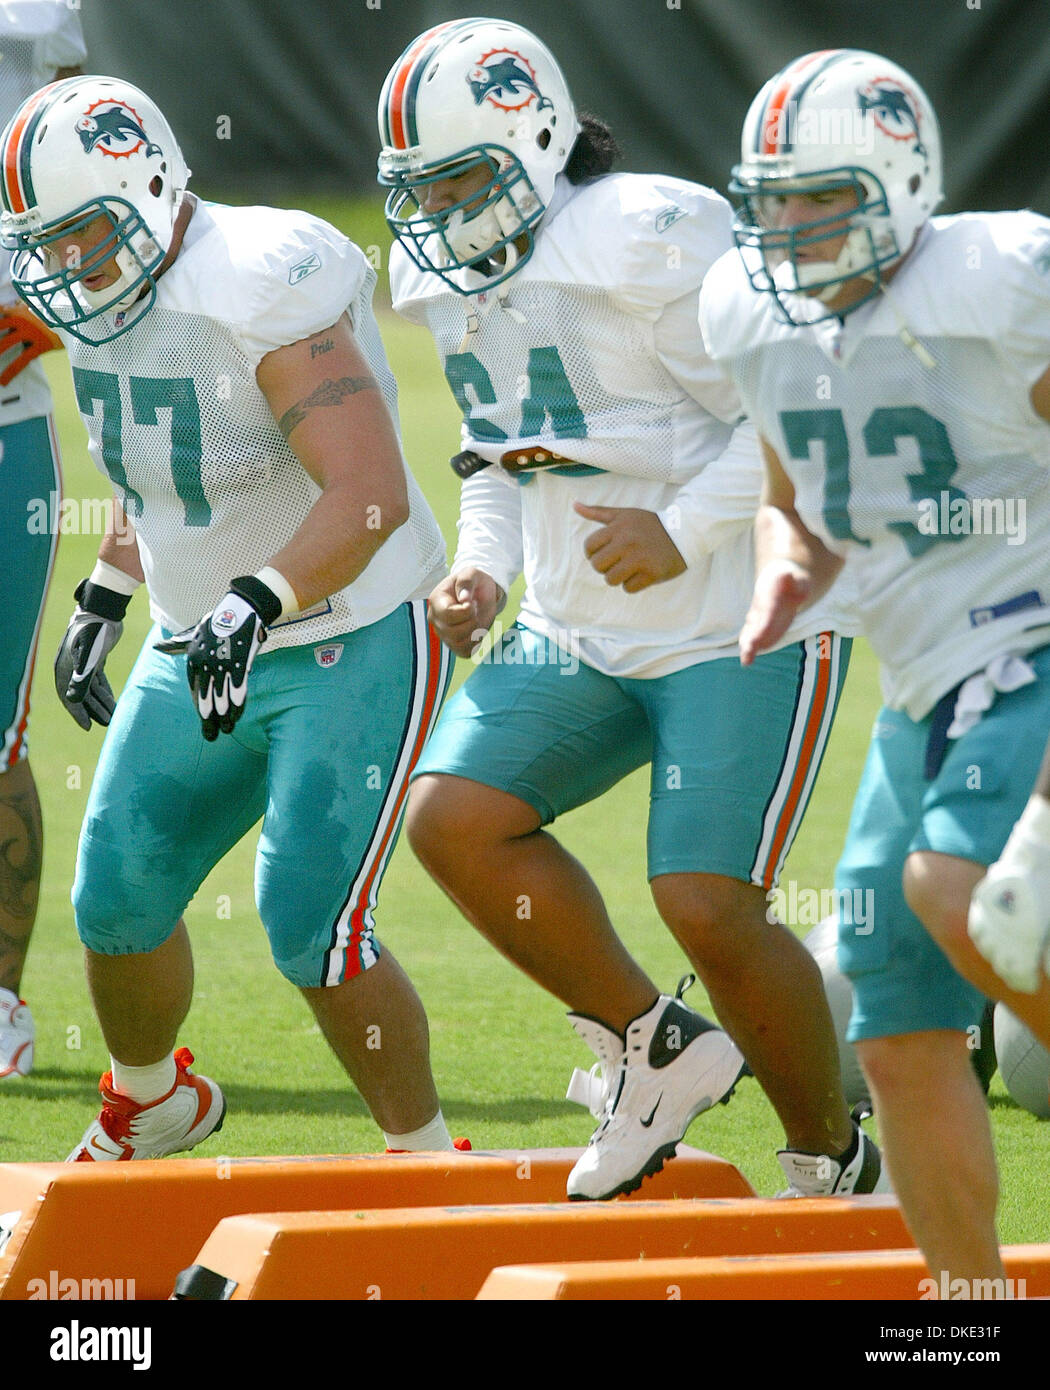 Jul 25, 2007 - Davie, FL, USA - Miami Dolphins linemen, from left, DREW MORMINO, SAMSON SATELE, and DAN STEVENSON, during a drill at Dolphins rookie camp Wednesday in Davie. (Credit Image: © Bill Ingram/Palm Beach Post/ZUMA Press) RESTRICTIONS: USA Tabloid RIGHTS OUT! Stock Photo